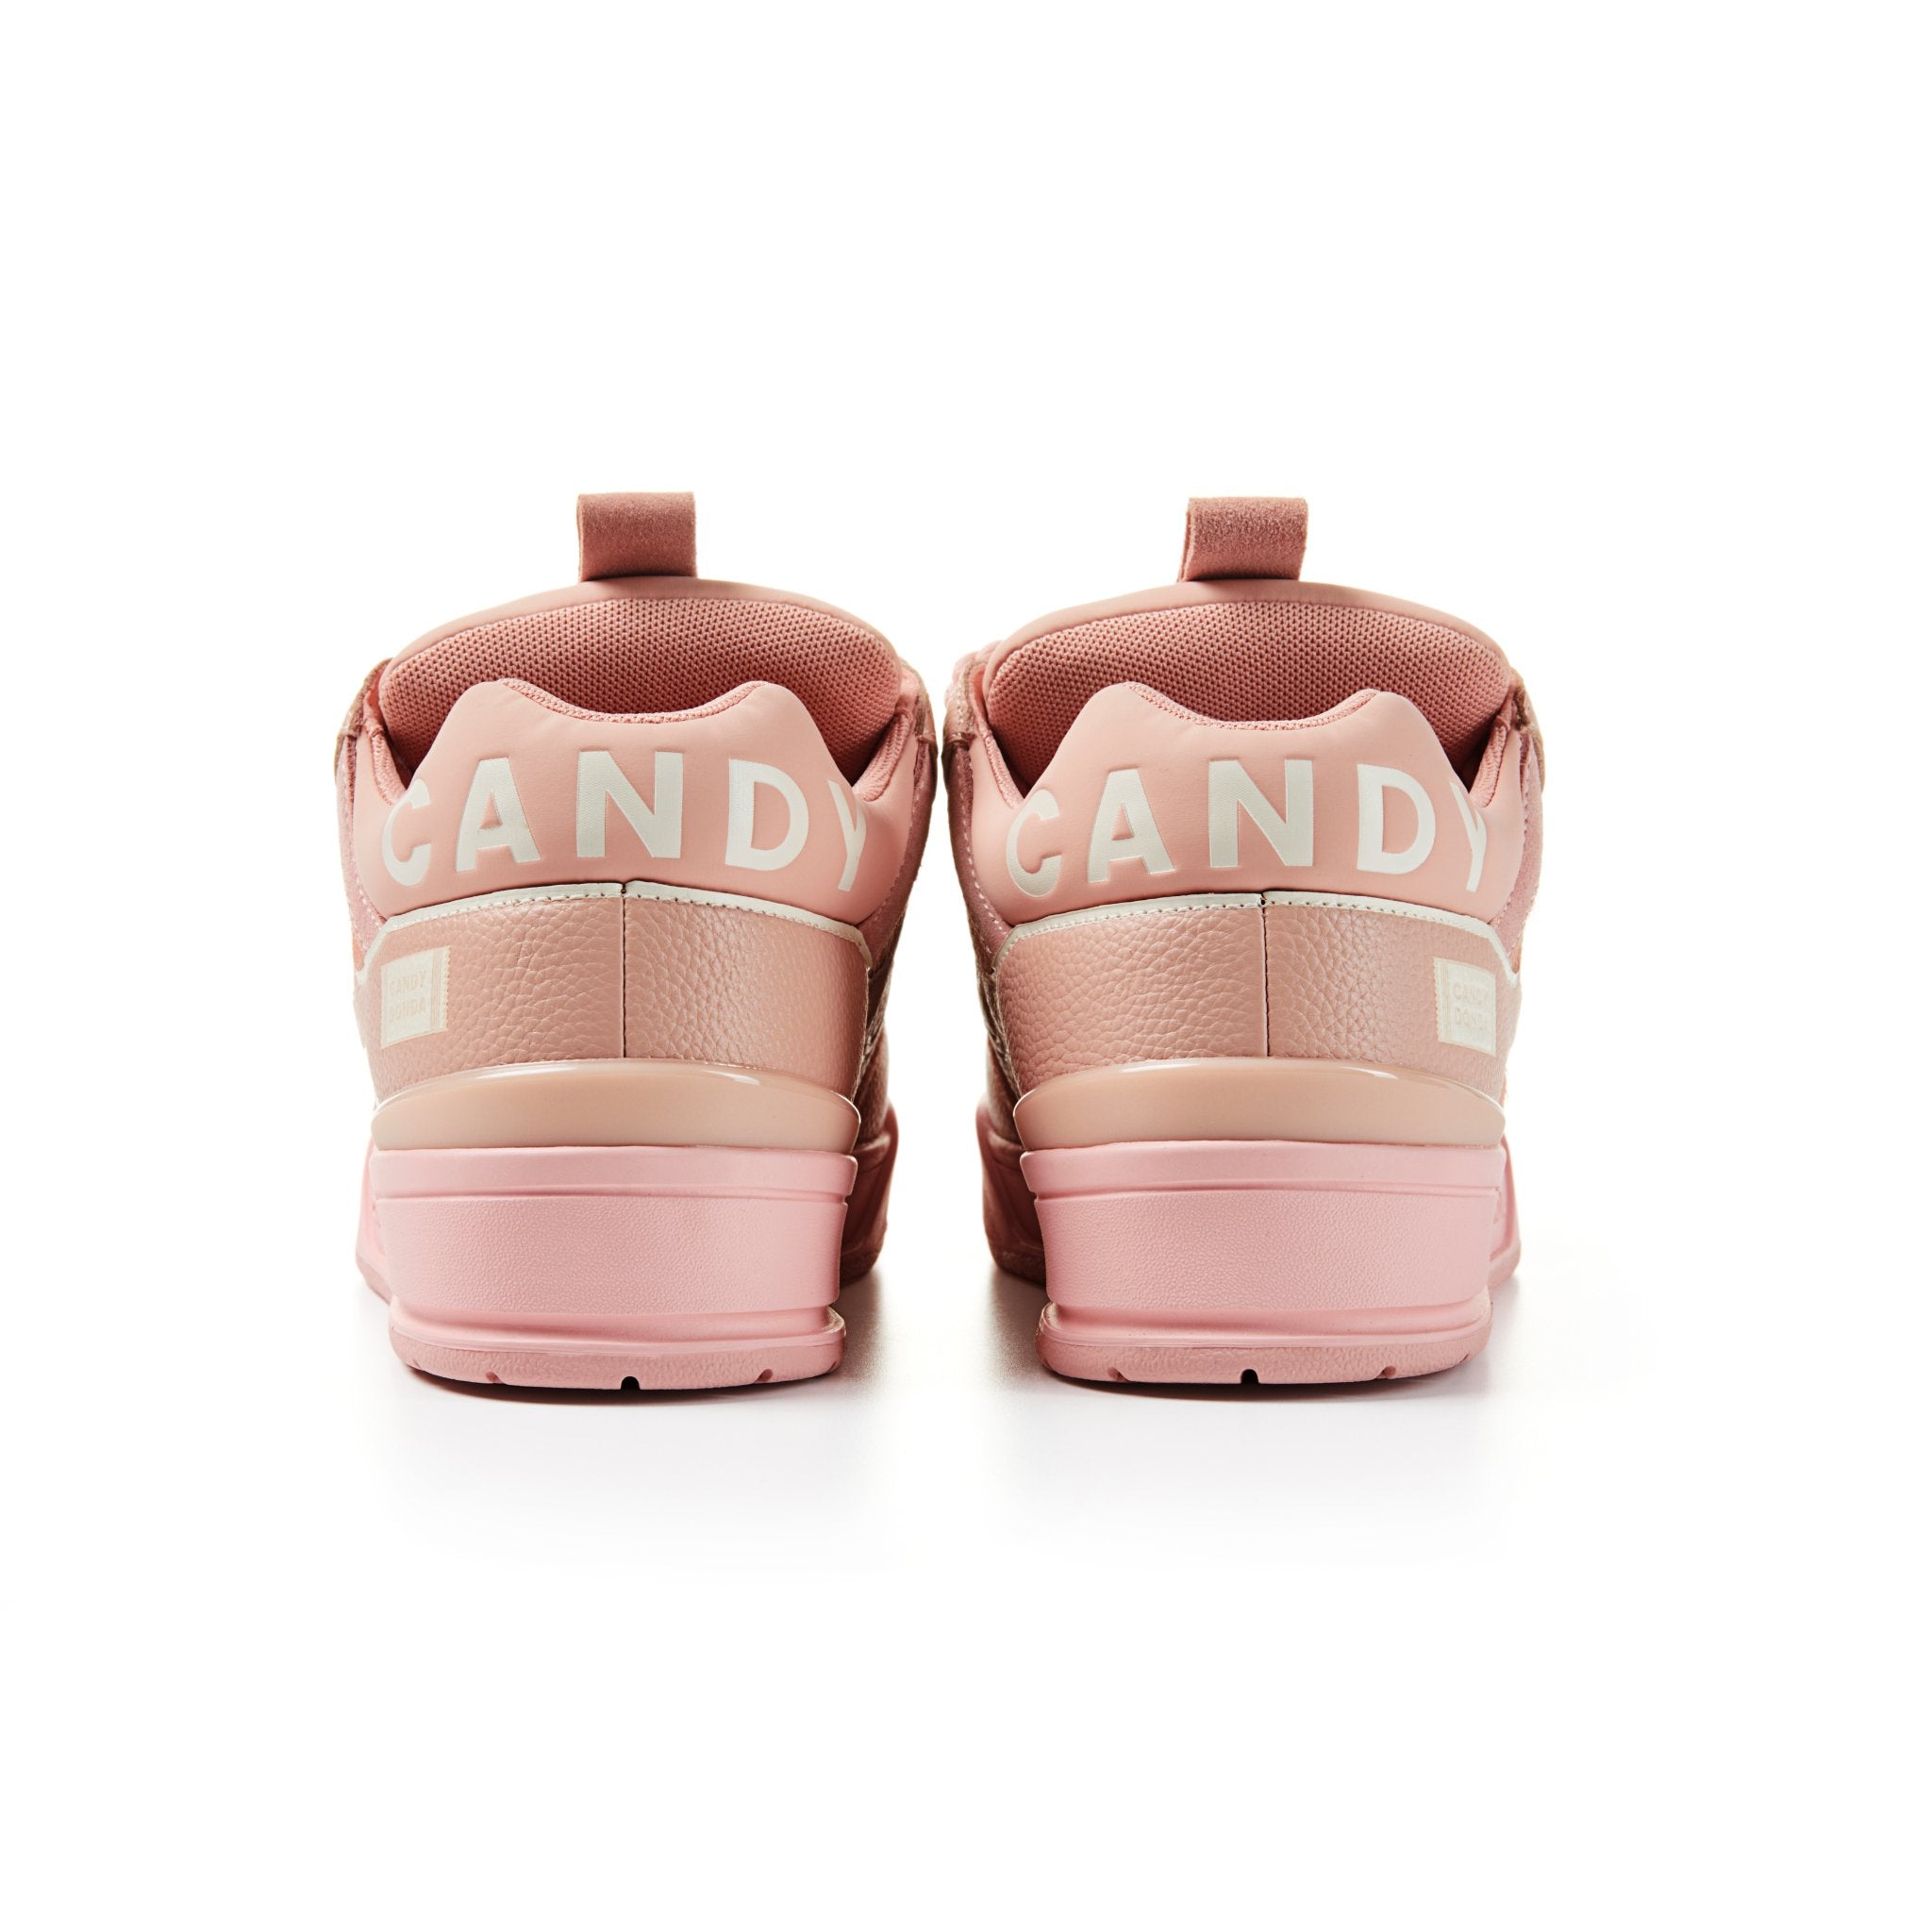 CANDYDONDA Fuzz Pink Curbmelo Sneaker | MADA IN CHINA